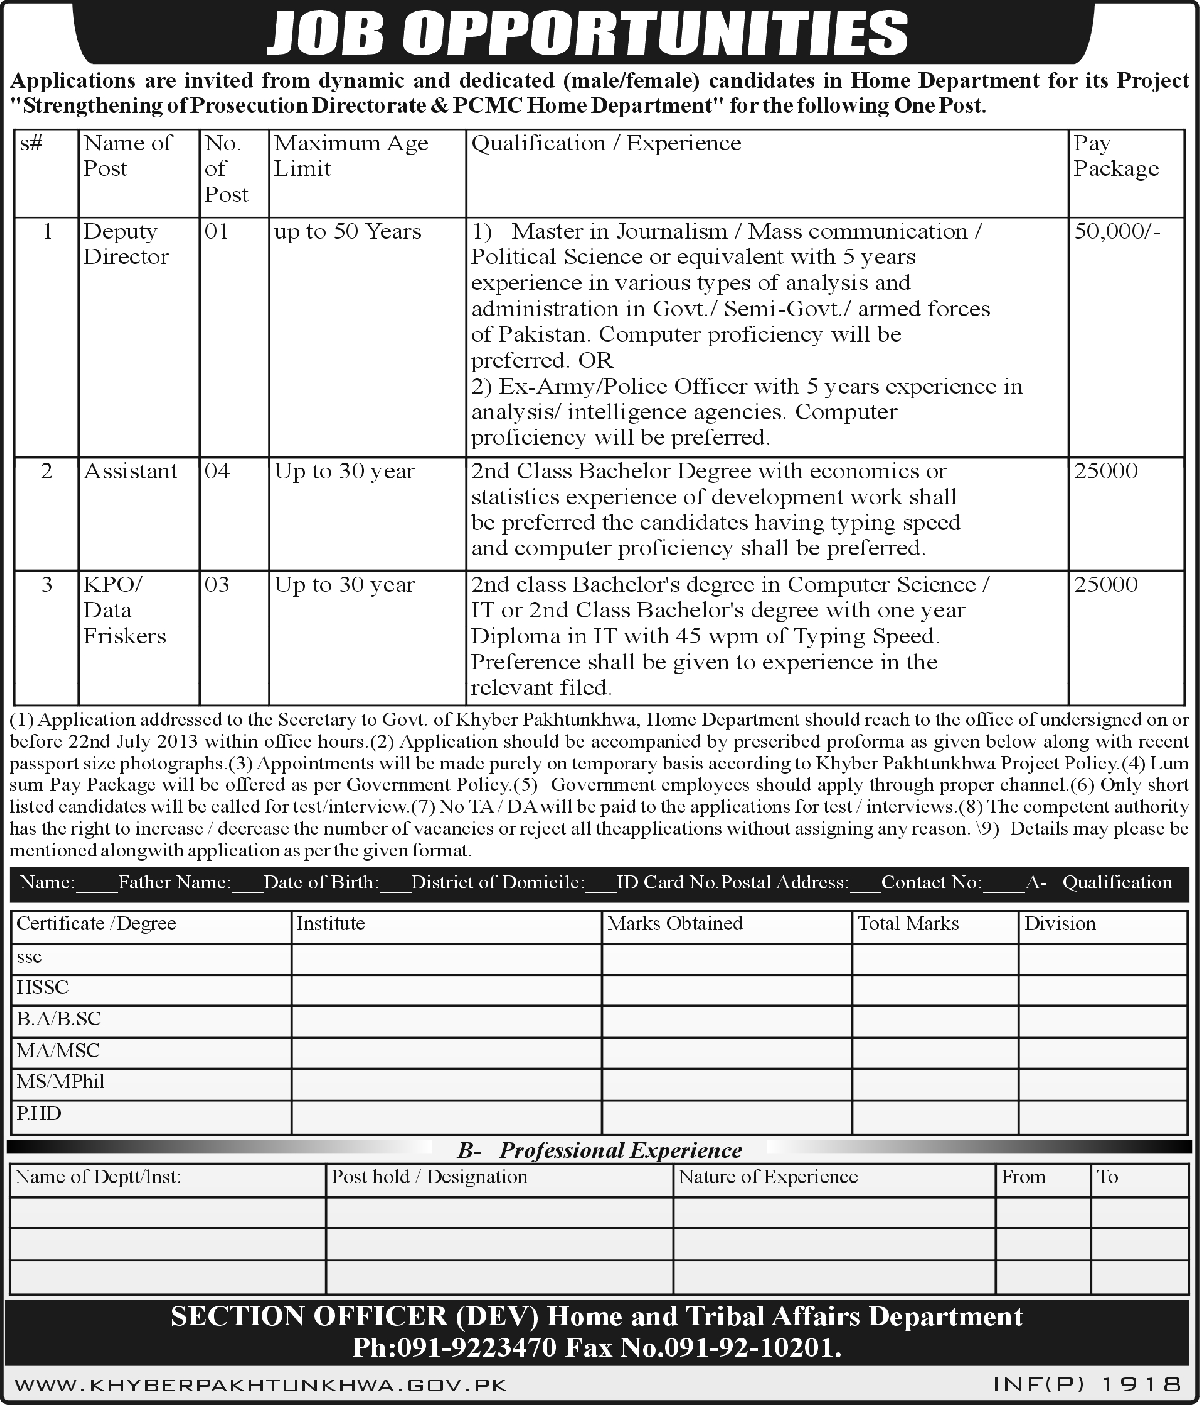 Home and Affairs Department Khyber Jobs for Deputy Director & Assistant